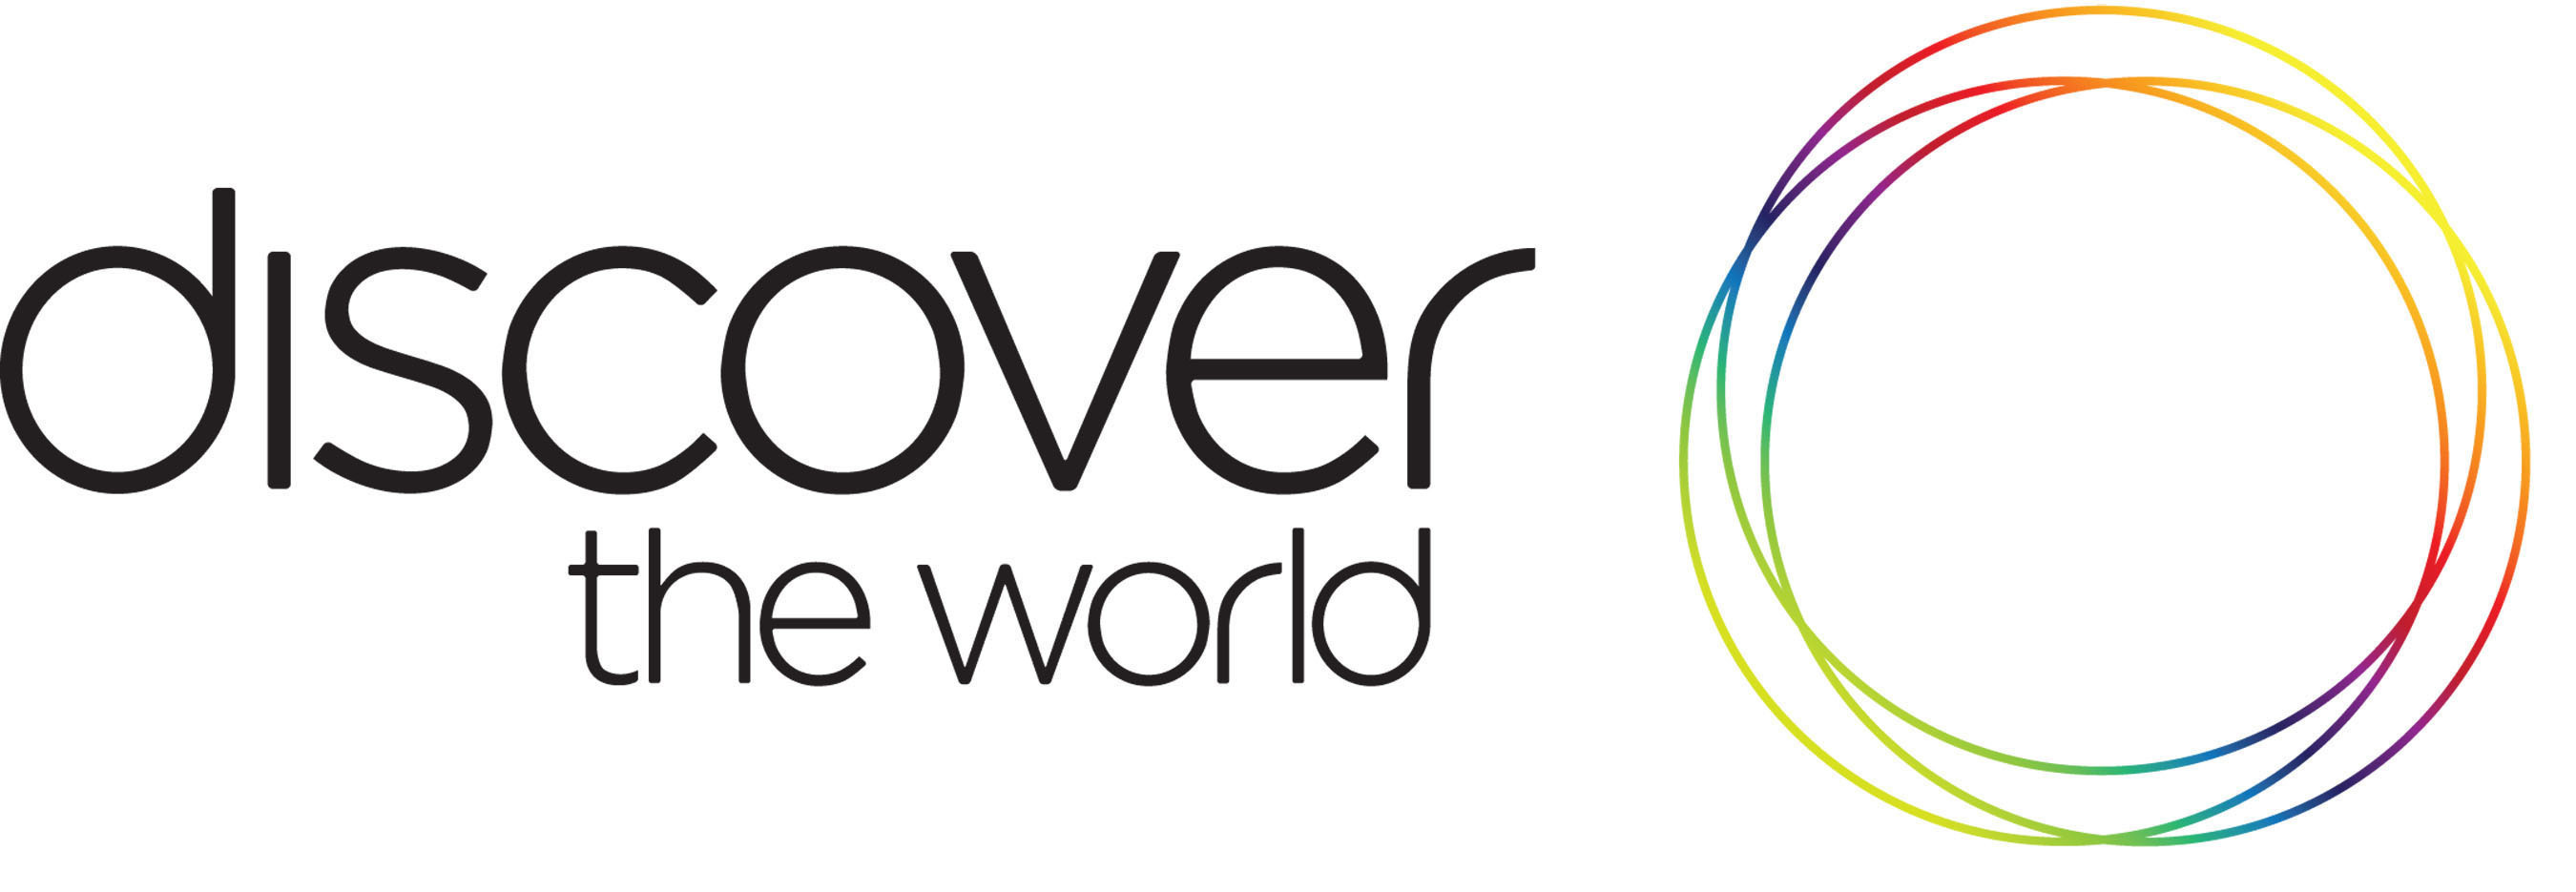 Discover the World's logo